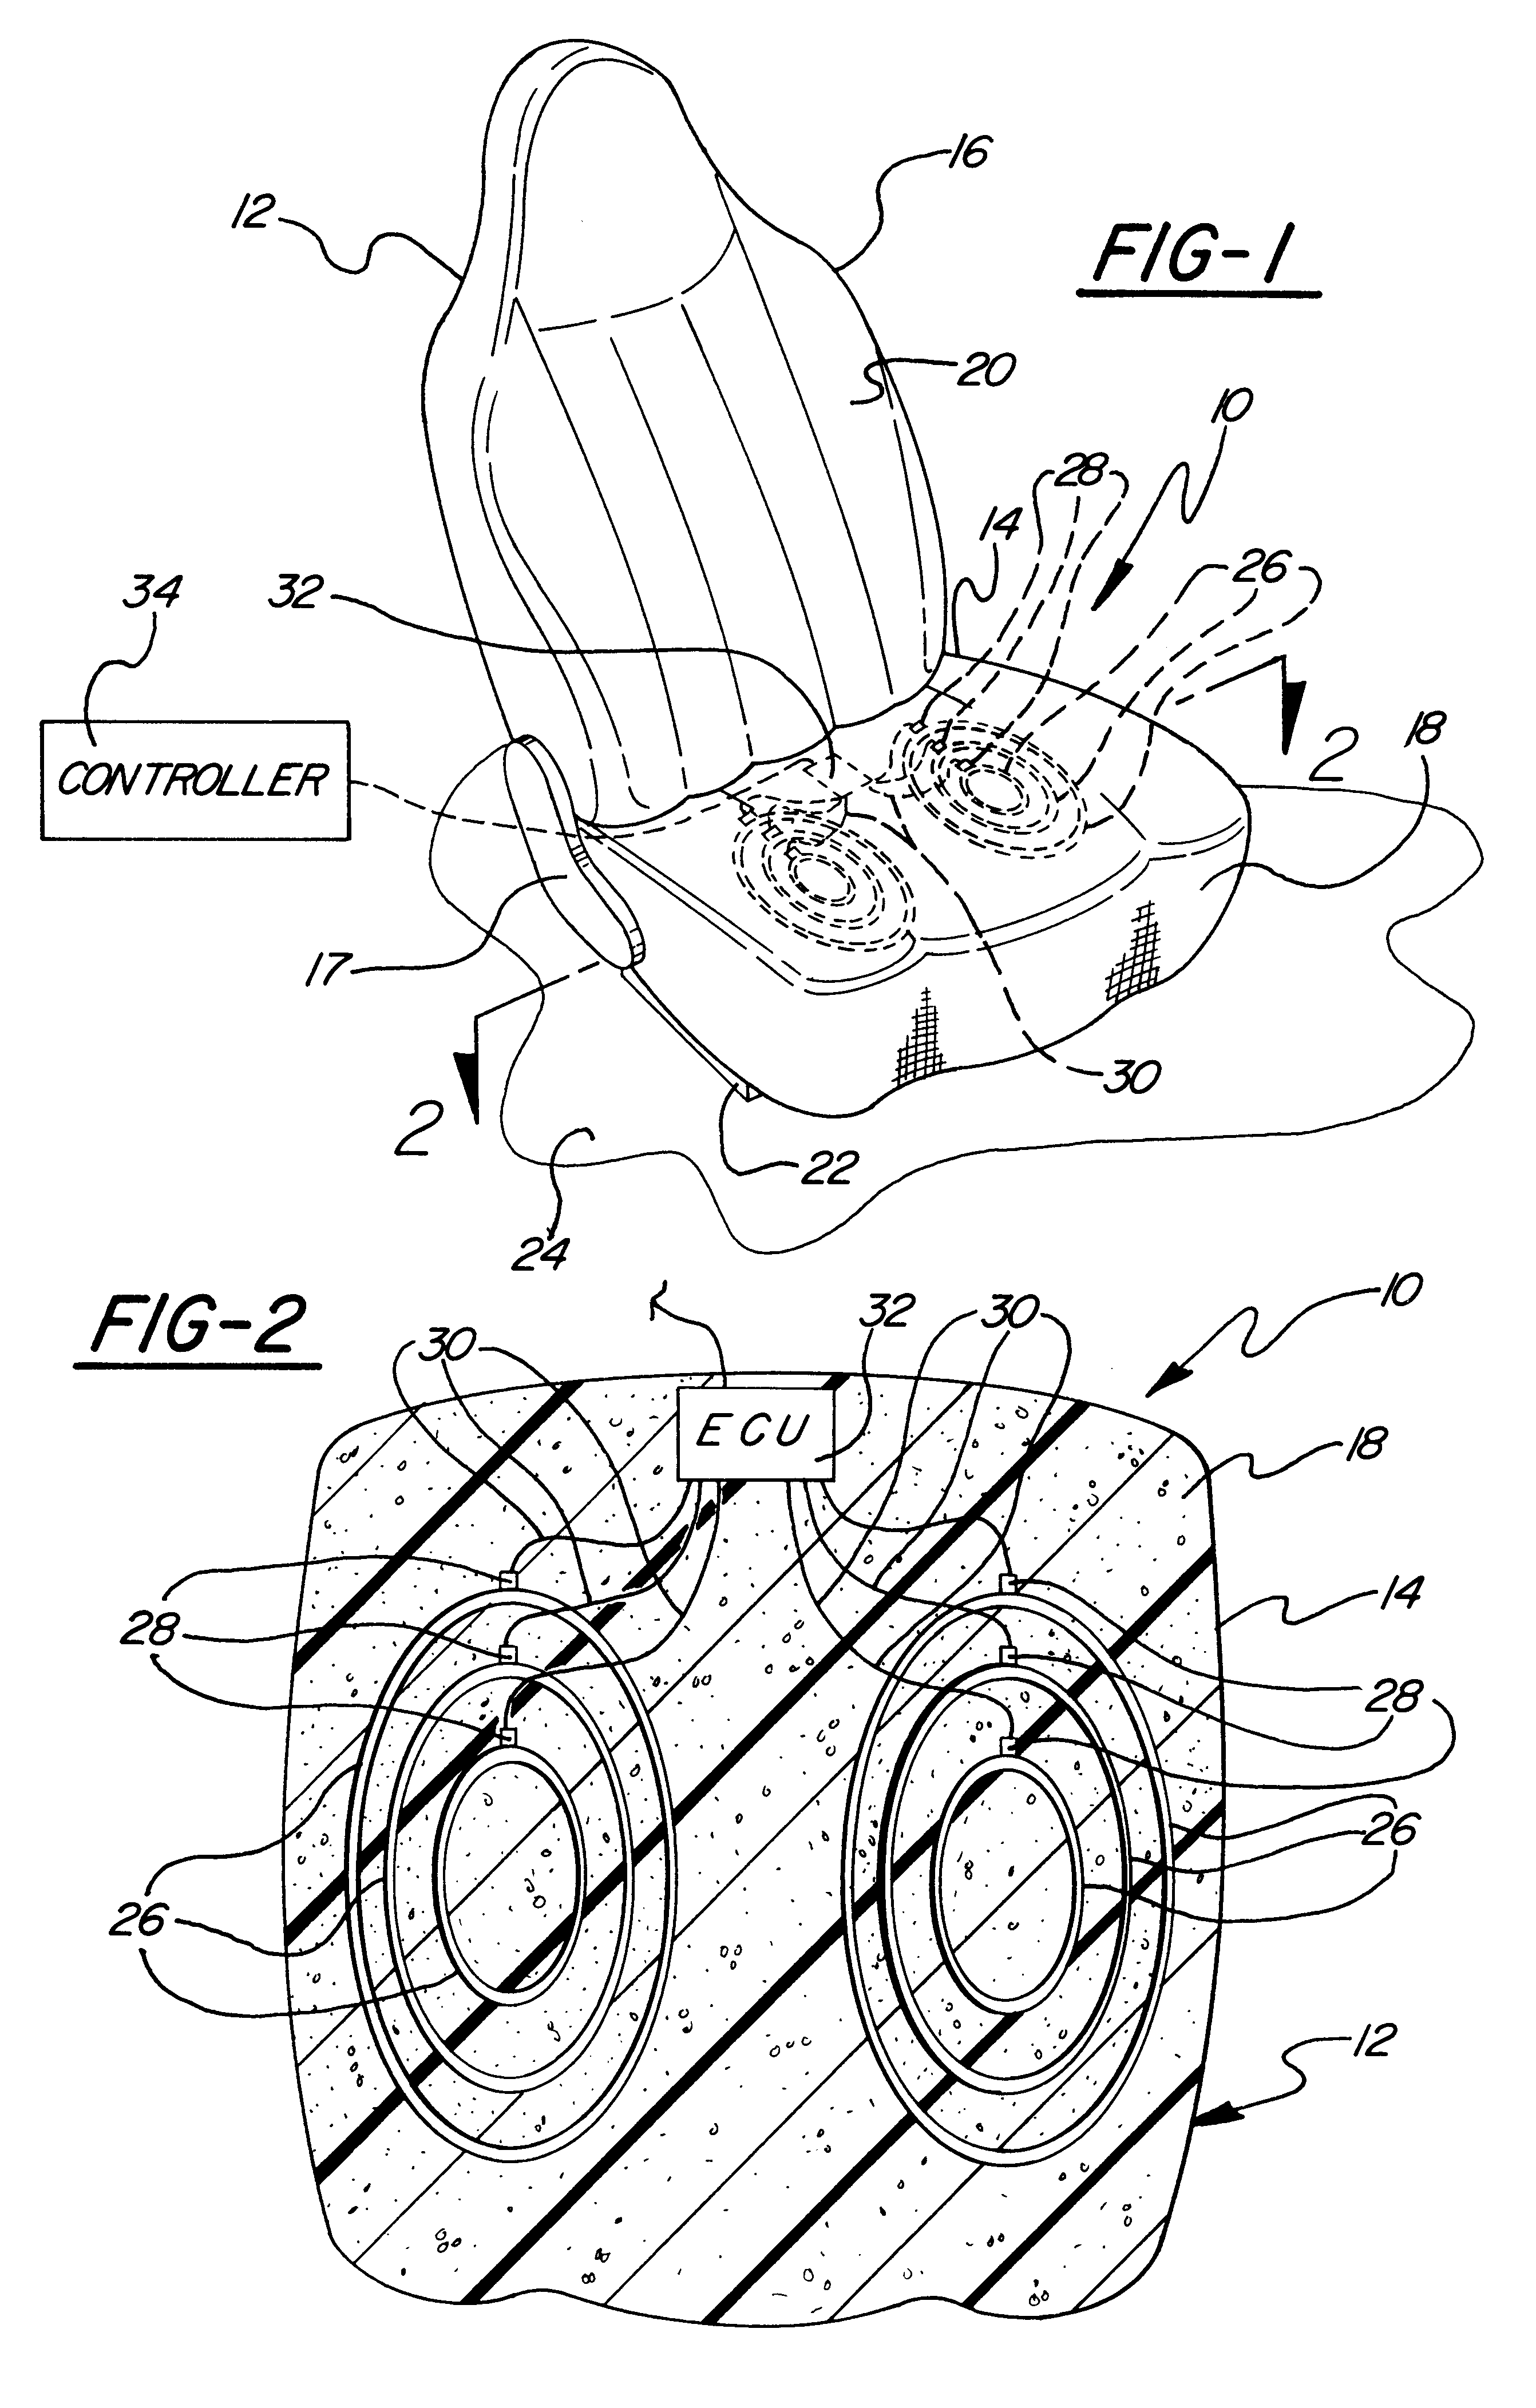 Occupant detection sensor assembly for seats